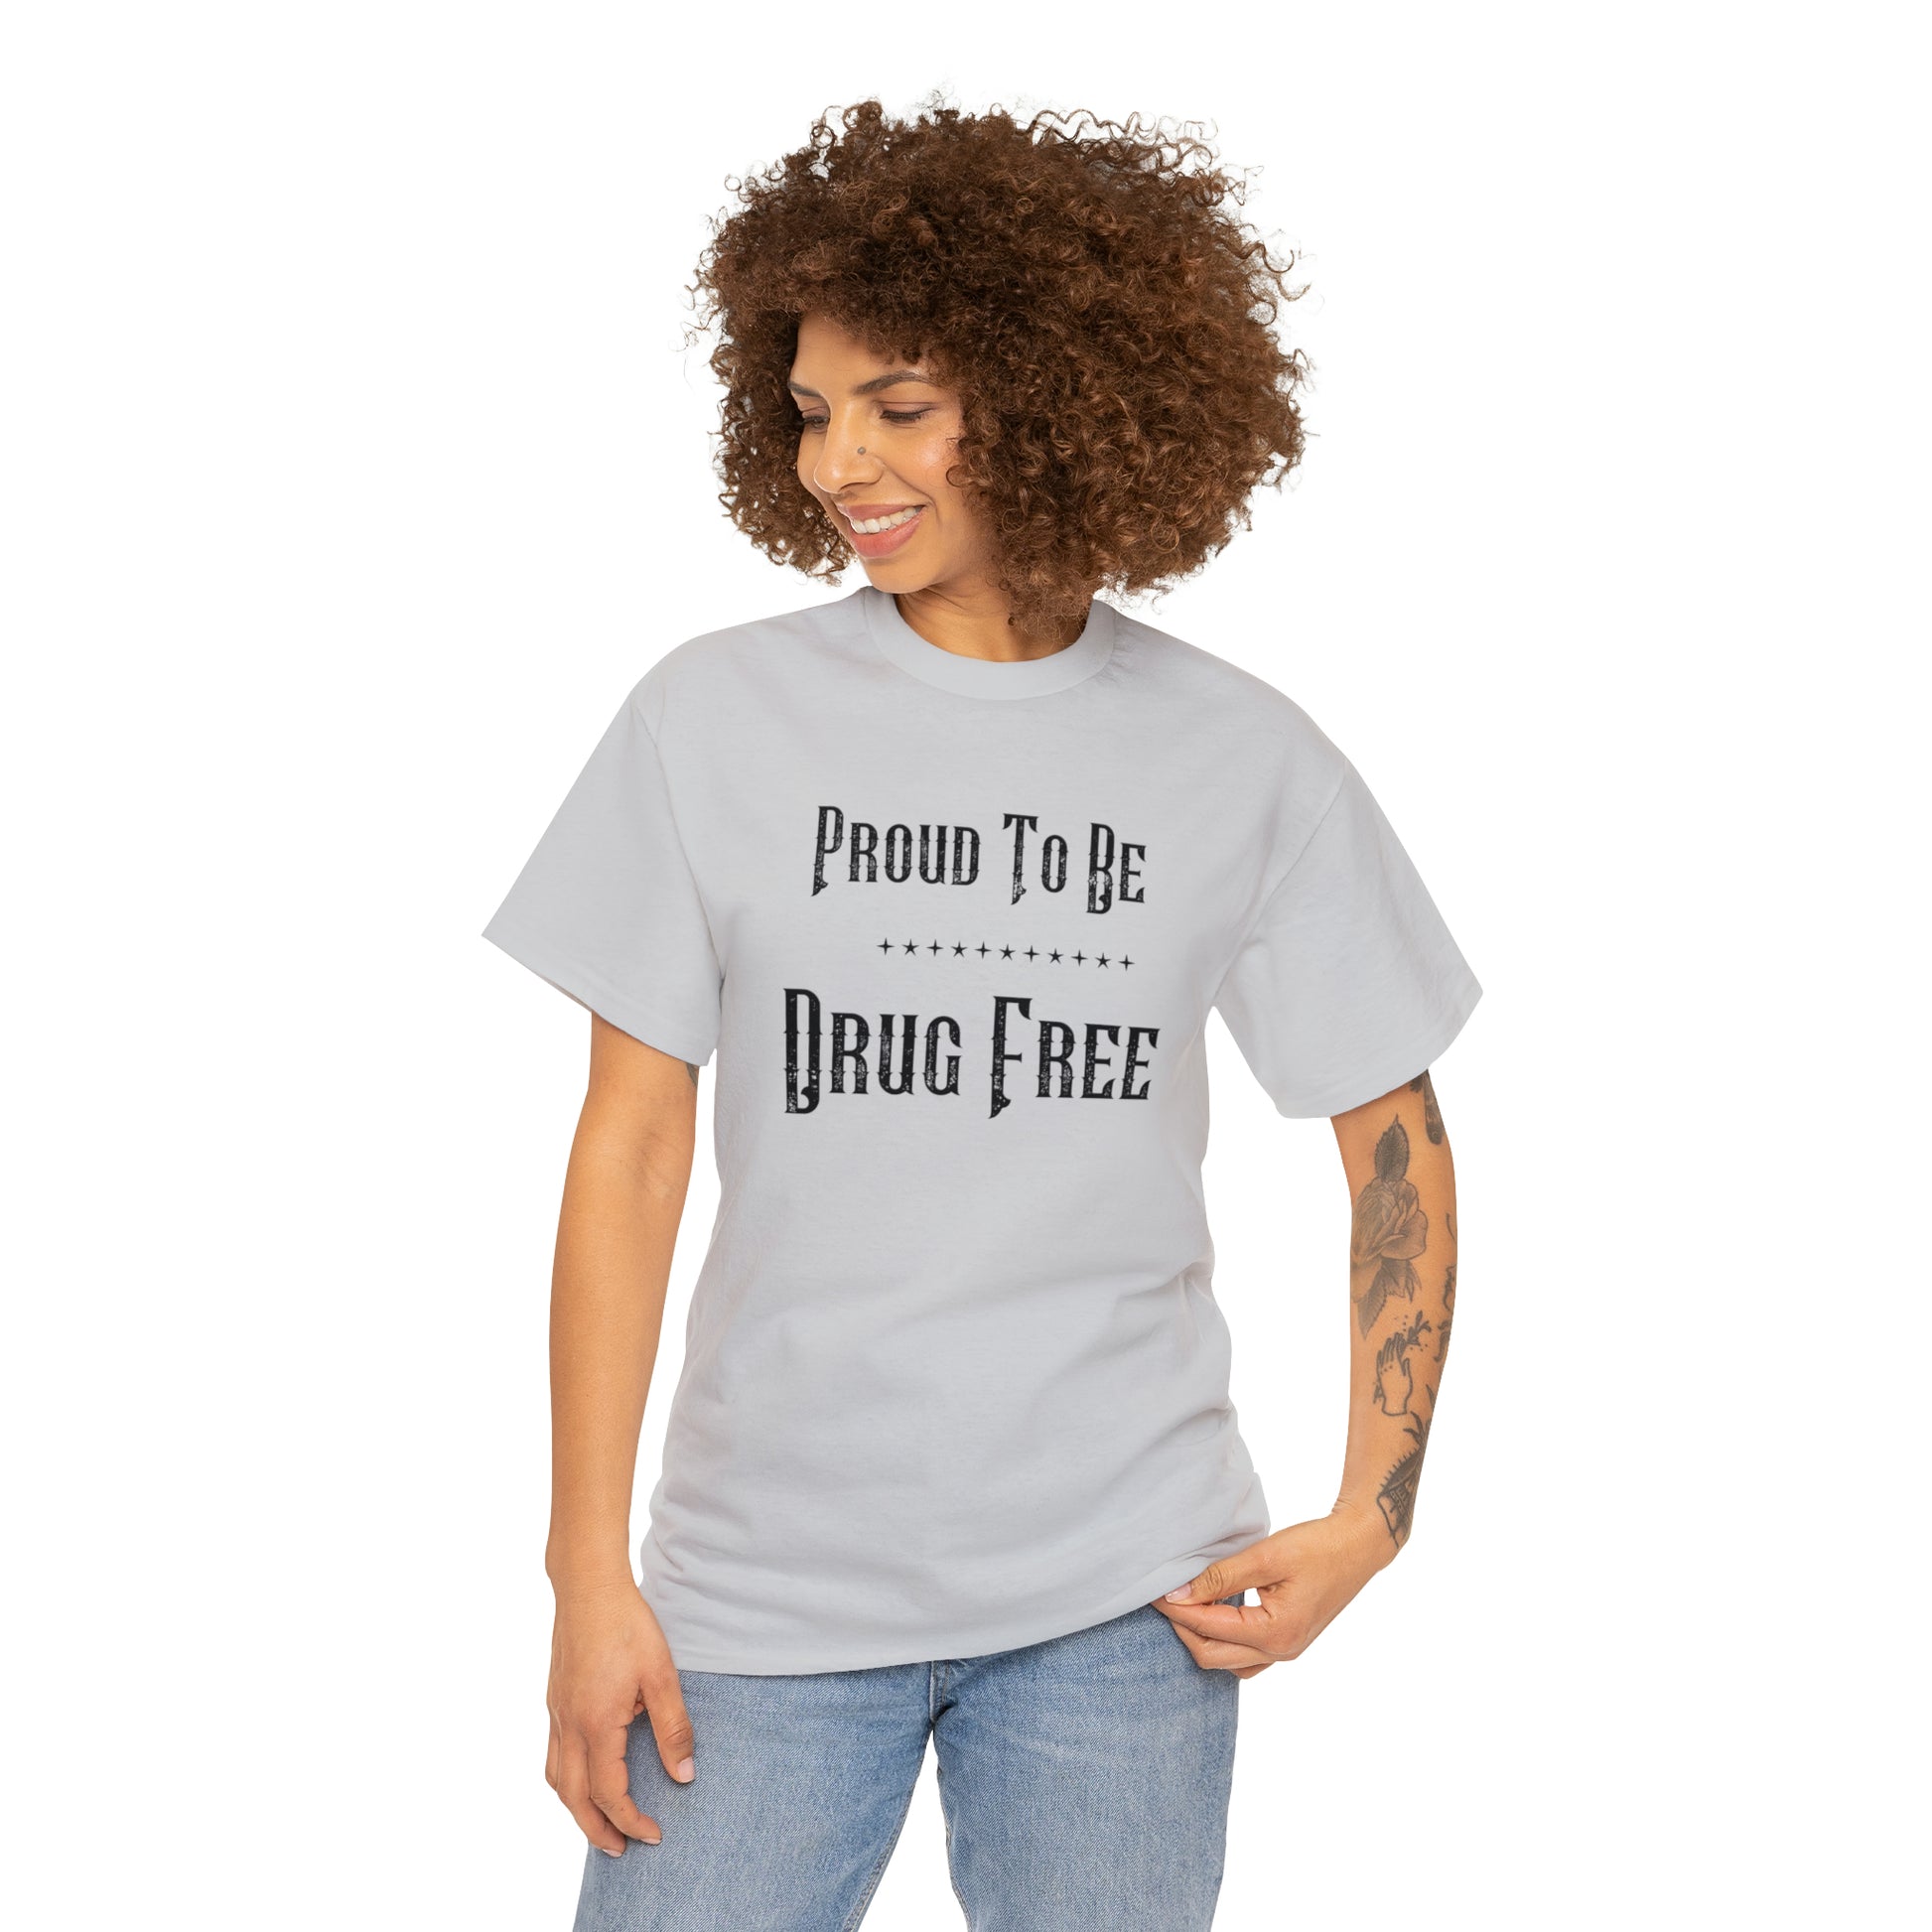 "Proud To Be Drug Free" T-Shirt - Weave Got Gifts - Unique Gifts You Won’t Find Anywhere Else!